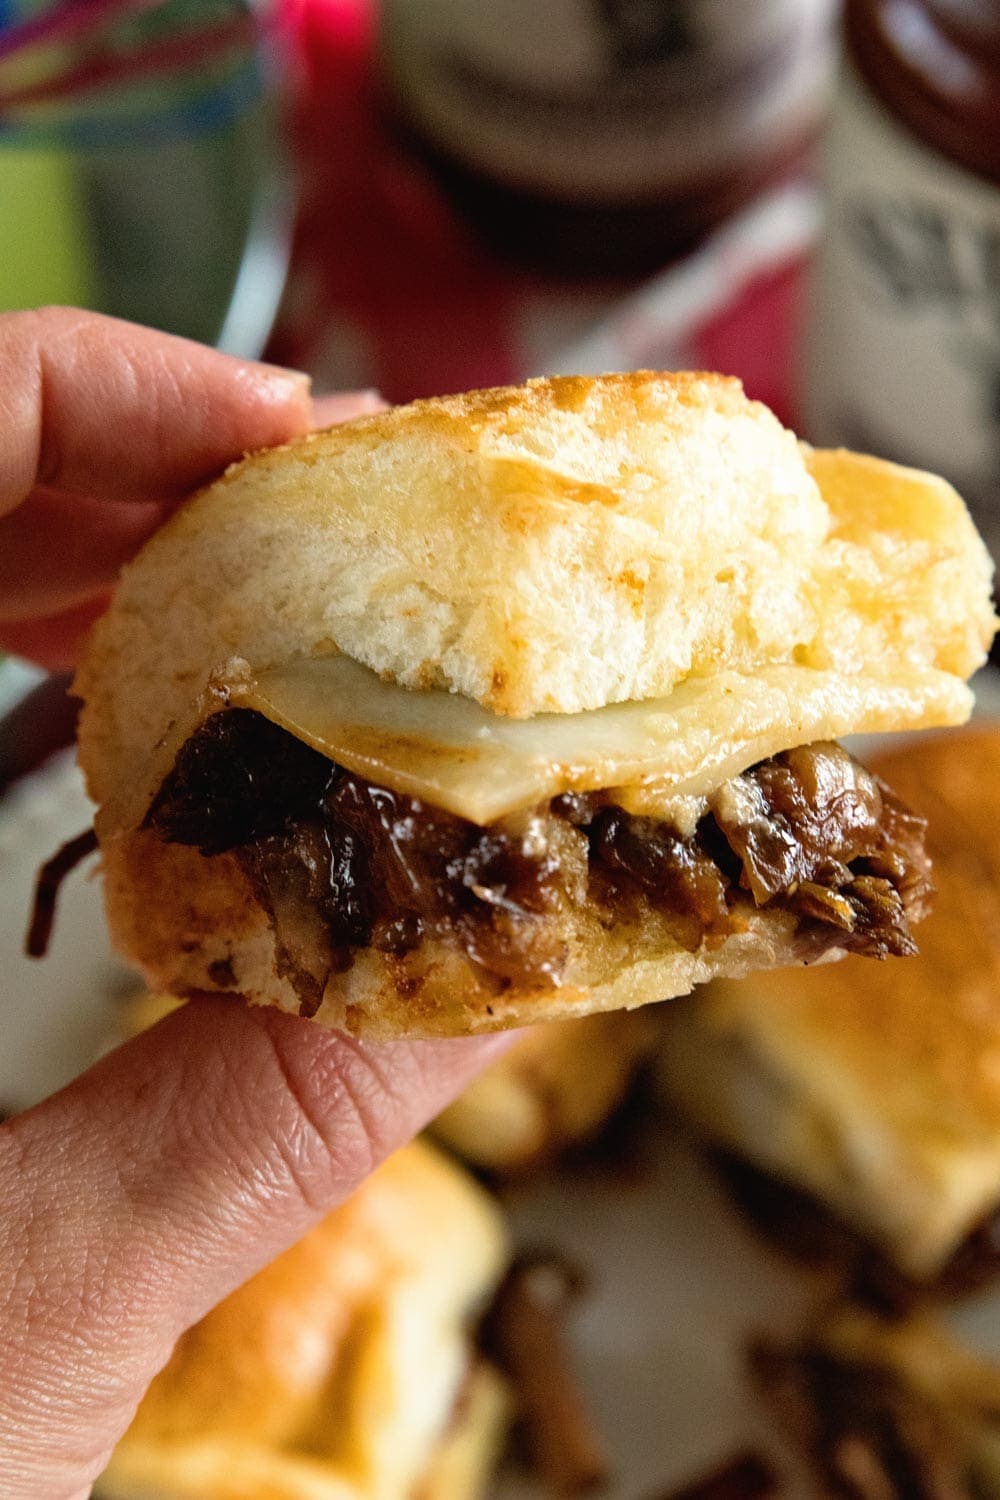 Instant Pot Brisket Sliders with Caramelized Onions ~ Tender, Shredded Brisket Cooked in Your Instant Pot. Stuffed into Sliders Then Topped with Caramelized Onions and Cheese! Perfect Finger Food for Parties!